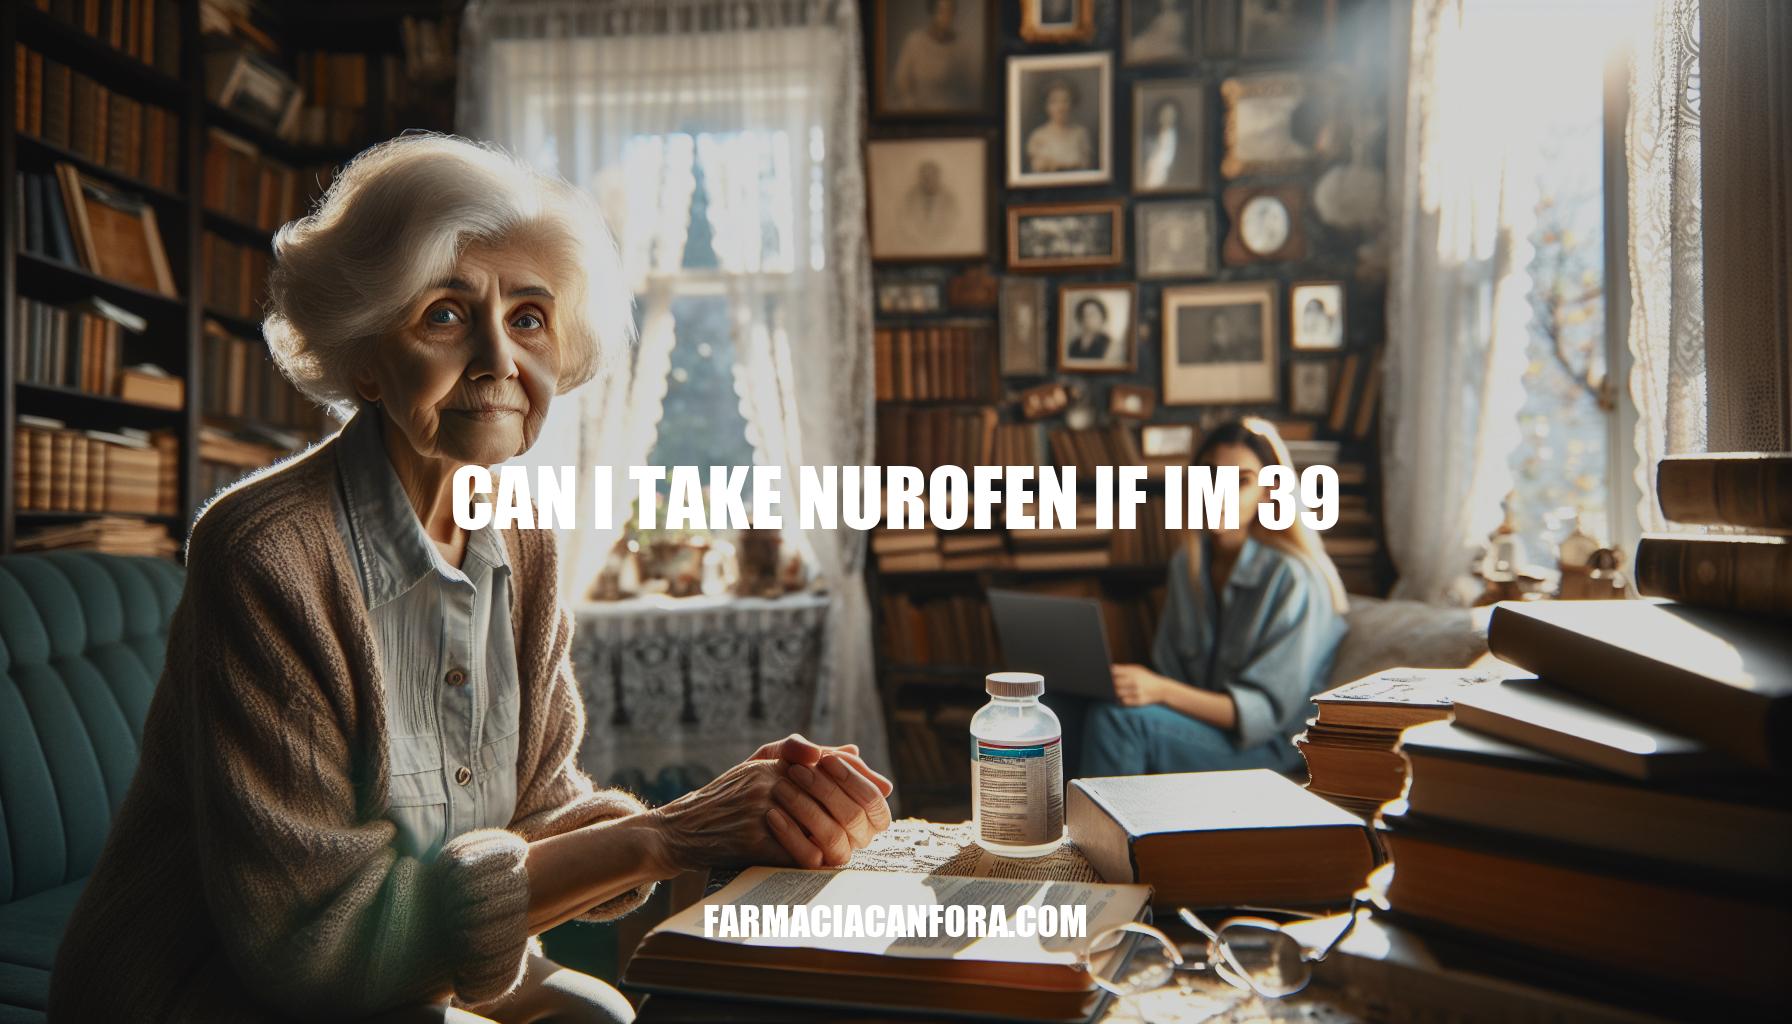 Can I Take Nurofen if I'm 39? Exploring Age-Related Concerns and Safe Pain Relief Options